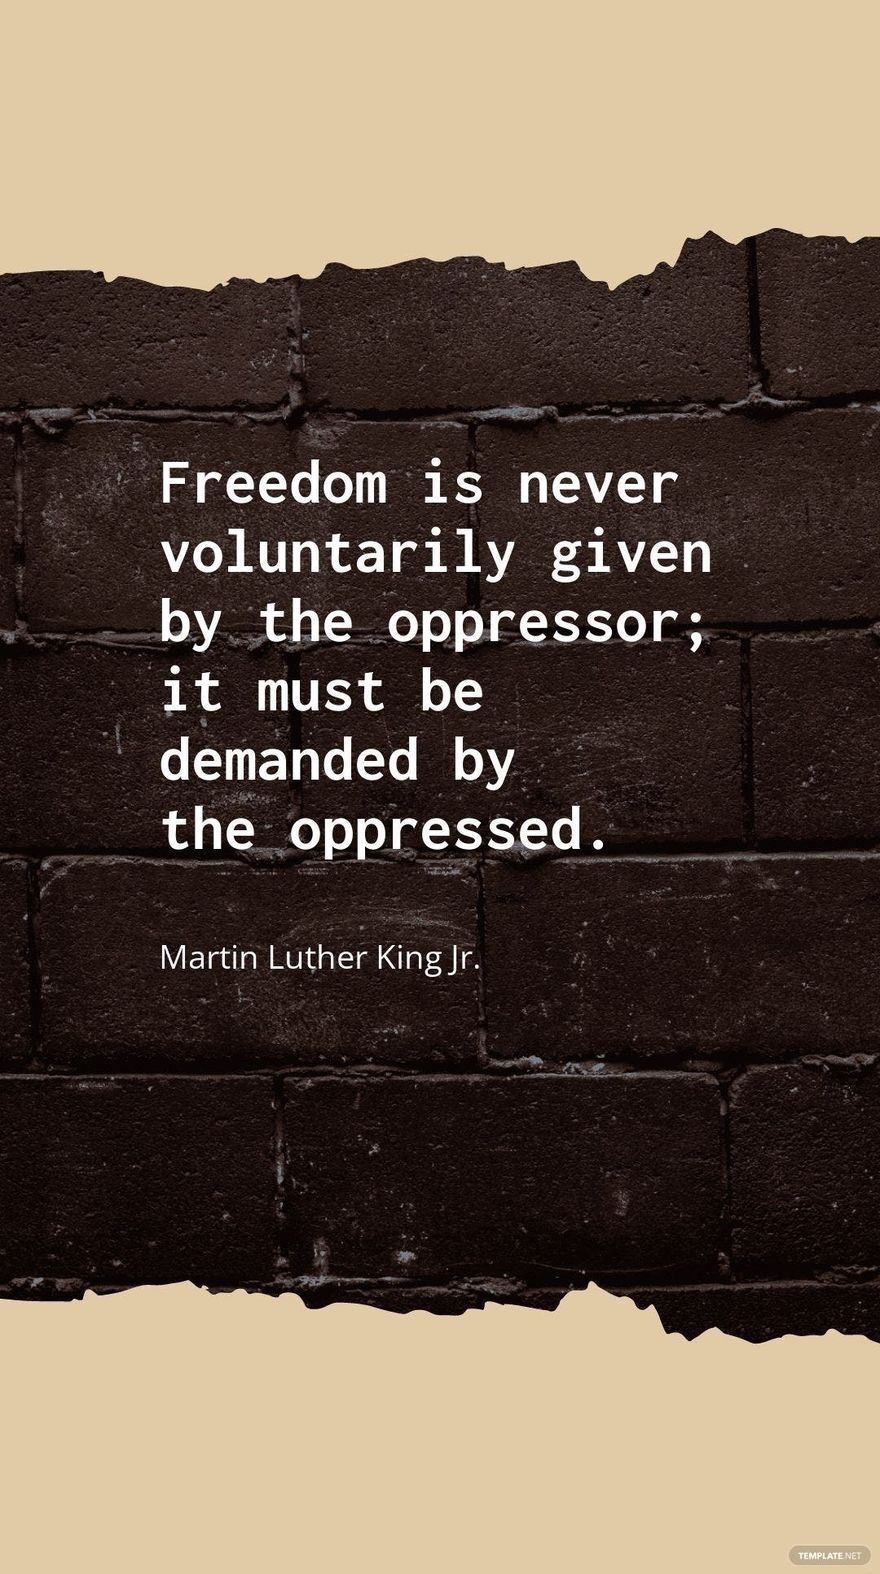 Free Martin Luther King Jr. - Freedom is never voluntarily given by the oppressor; it must be demanded by the oppressed. in JPG